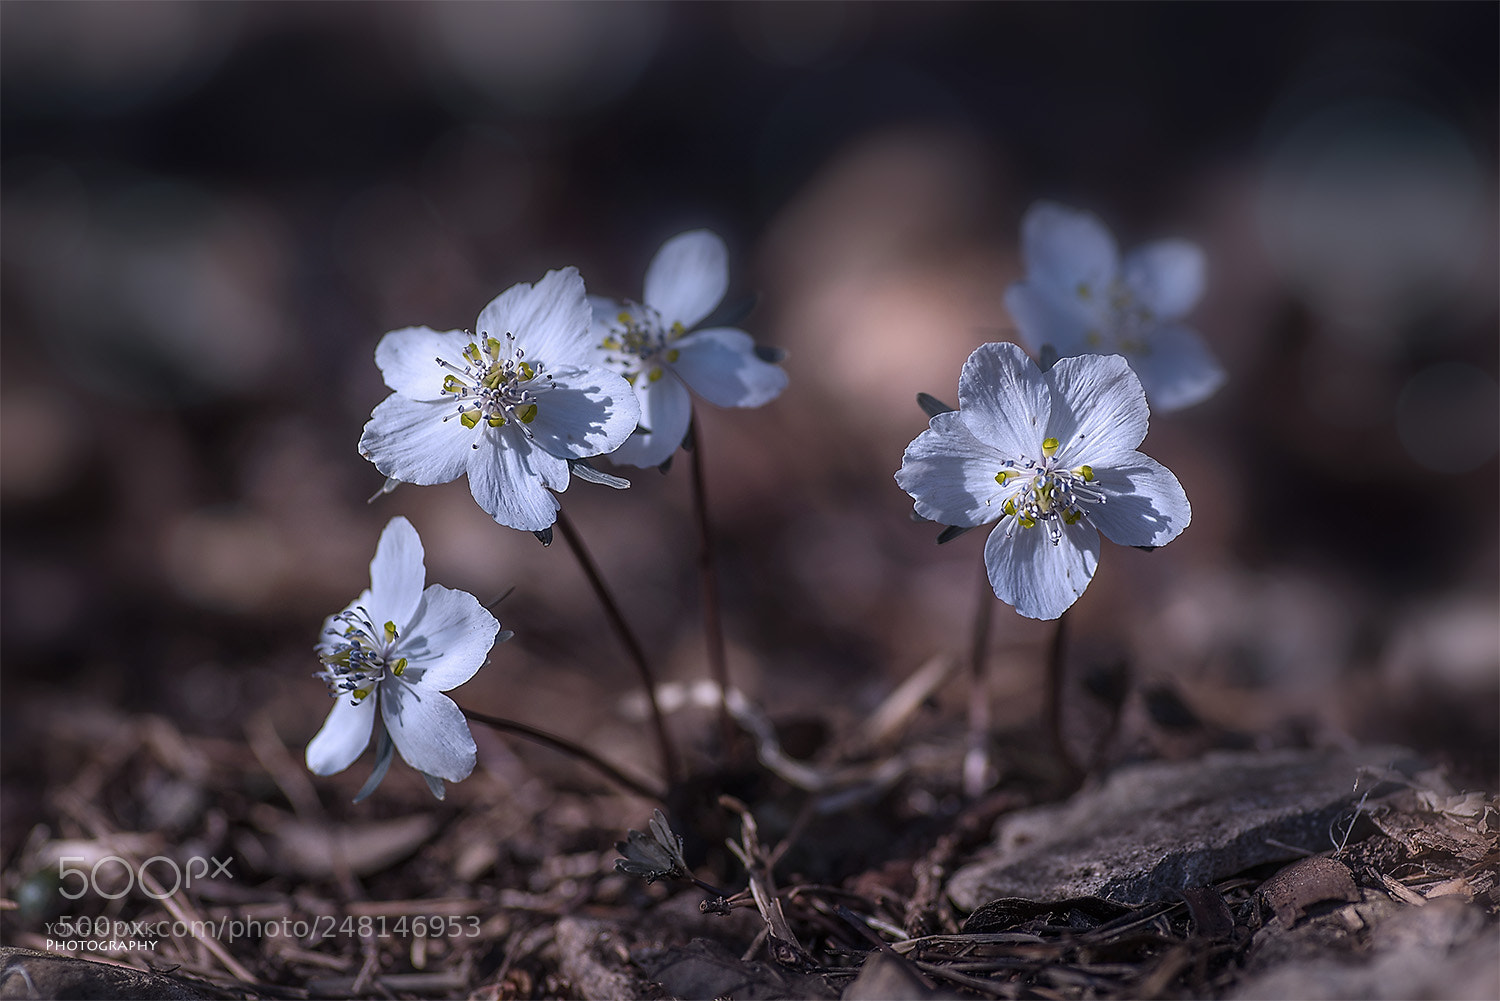 Pentax K-1 sample photo. Early spring at the photography